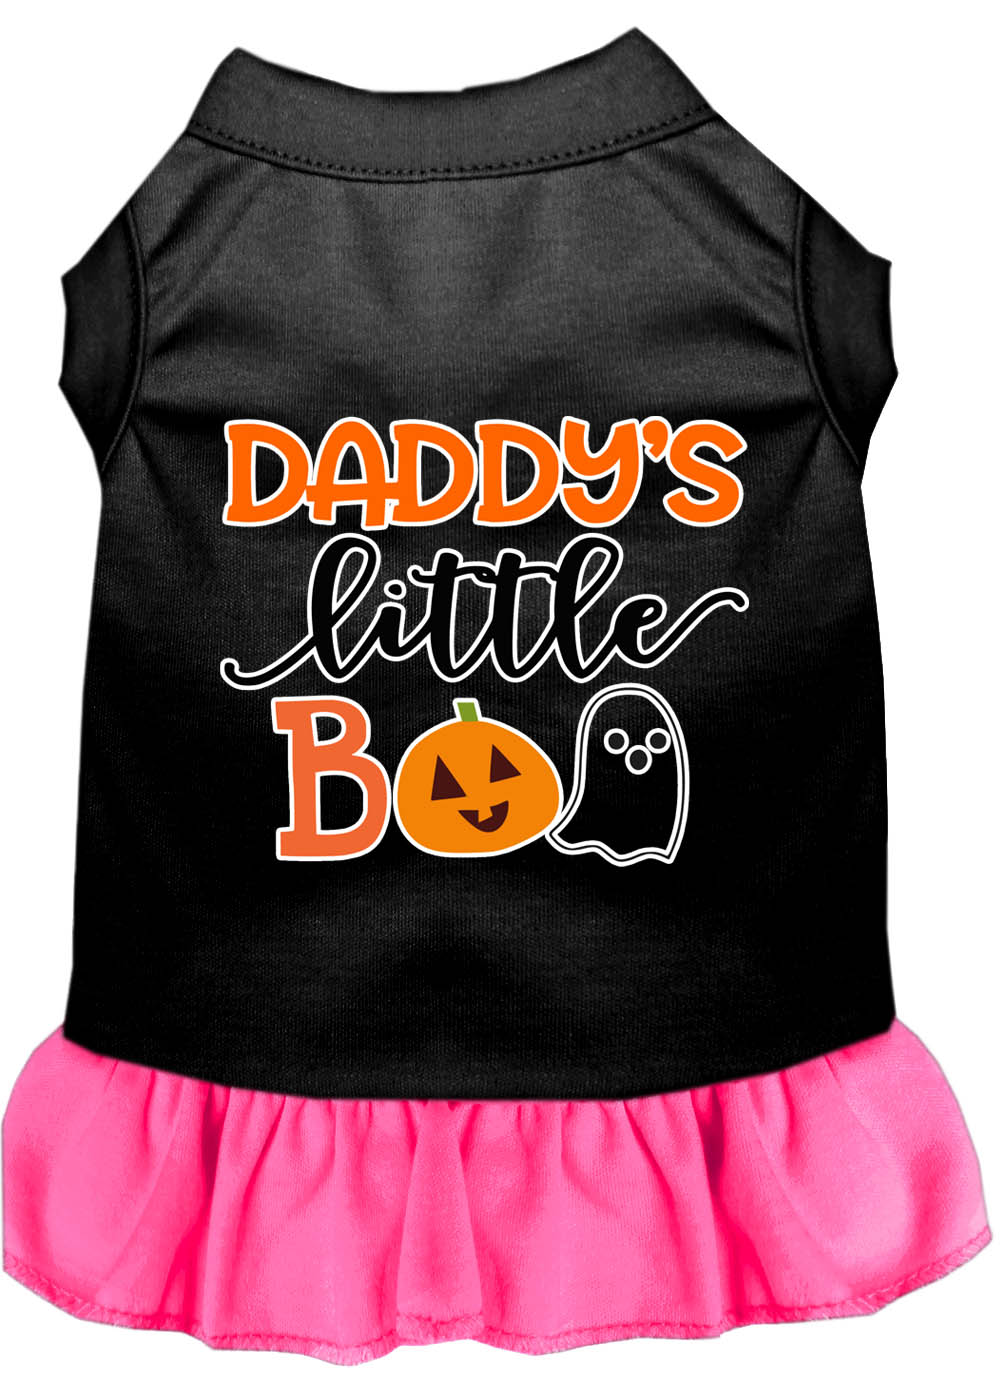 Daddy's Little Boo Screen Print Dog Dress Black with Bright Pink XXXL